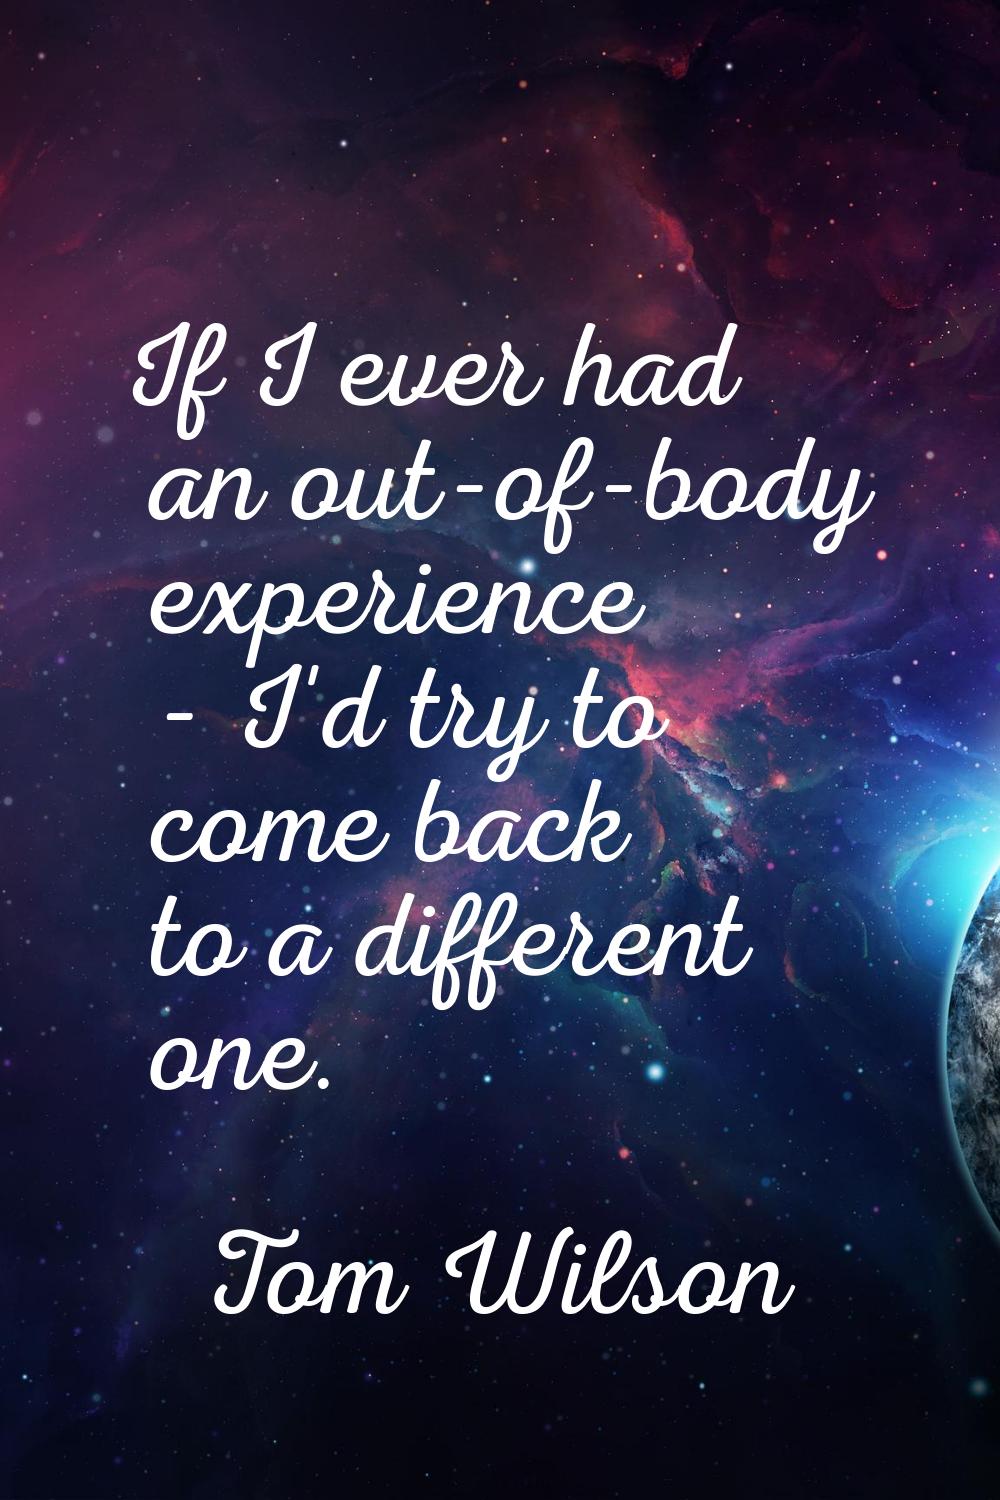 If I ever had an out-of-body experience - I'd try to come back to a different one.